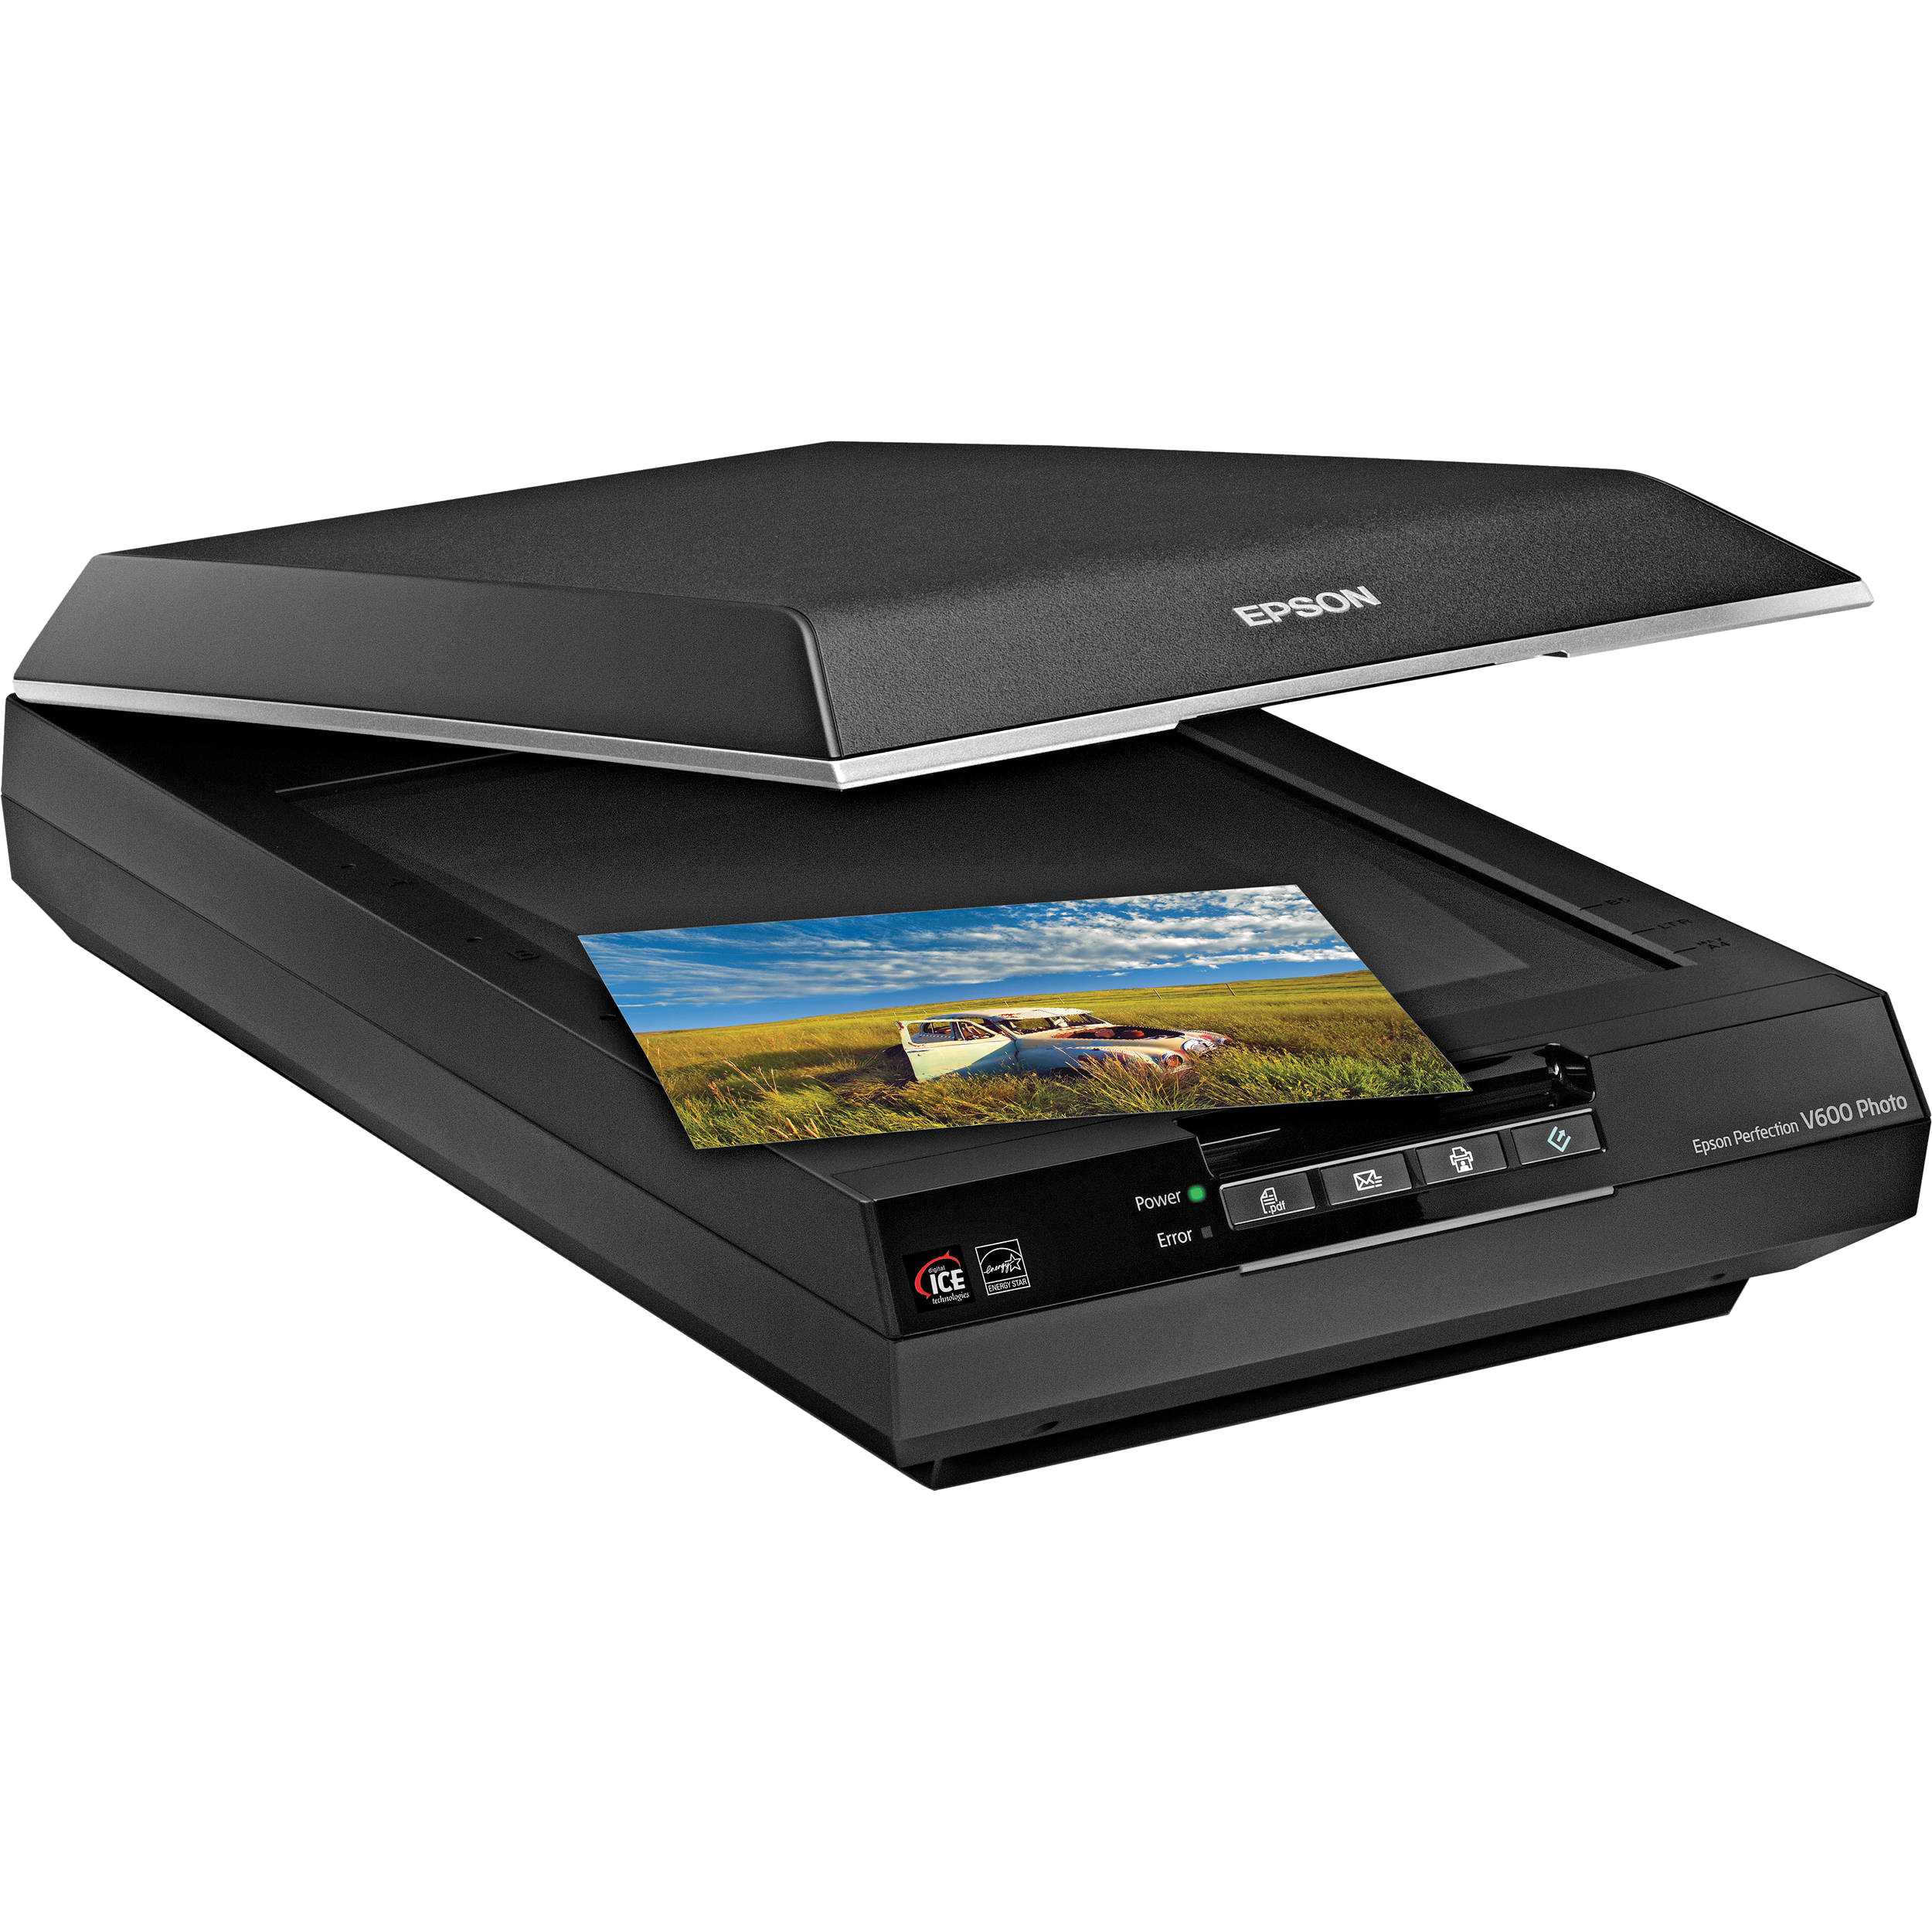 Scanner Device PNG HD Image